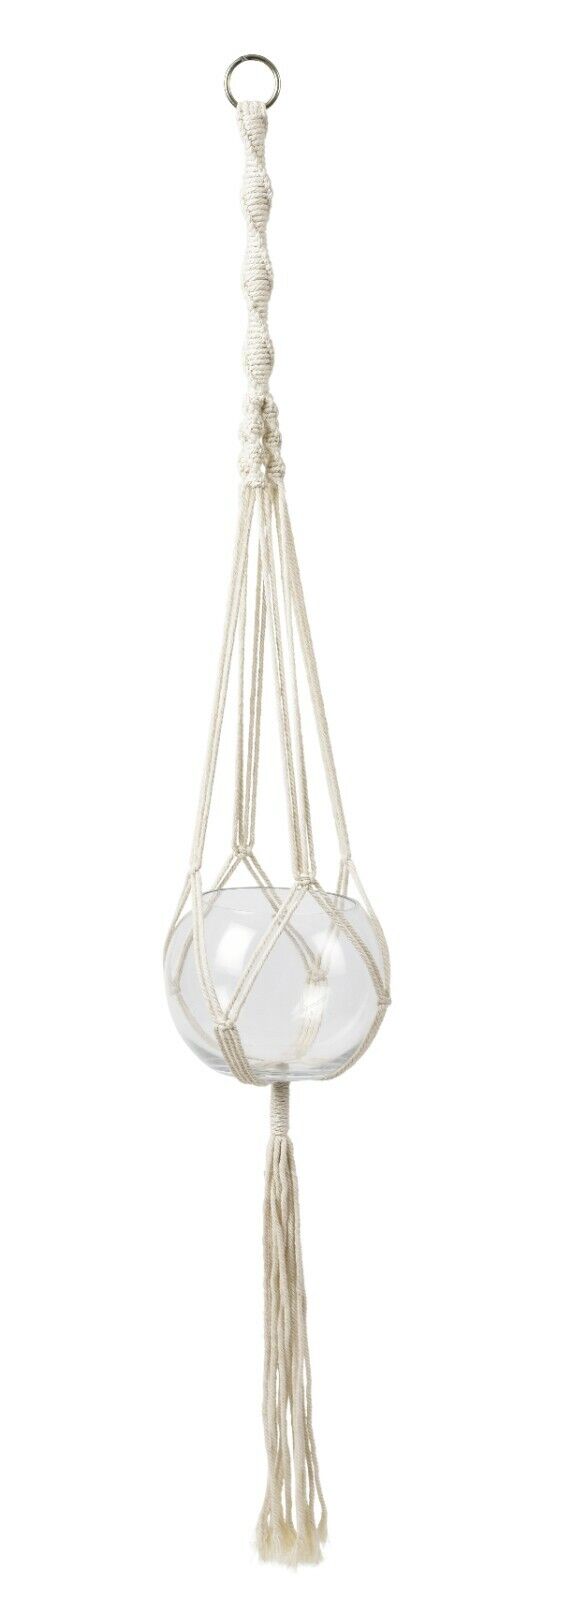 Burgon & Ball Hand Crafted Indoor House Plant, Herb Hanging Pots - 4 Designs